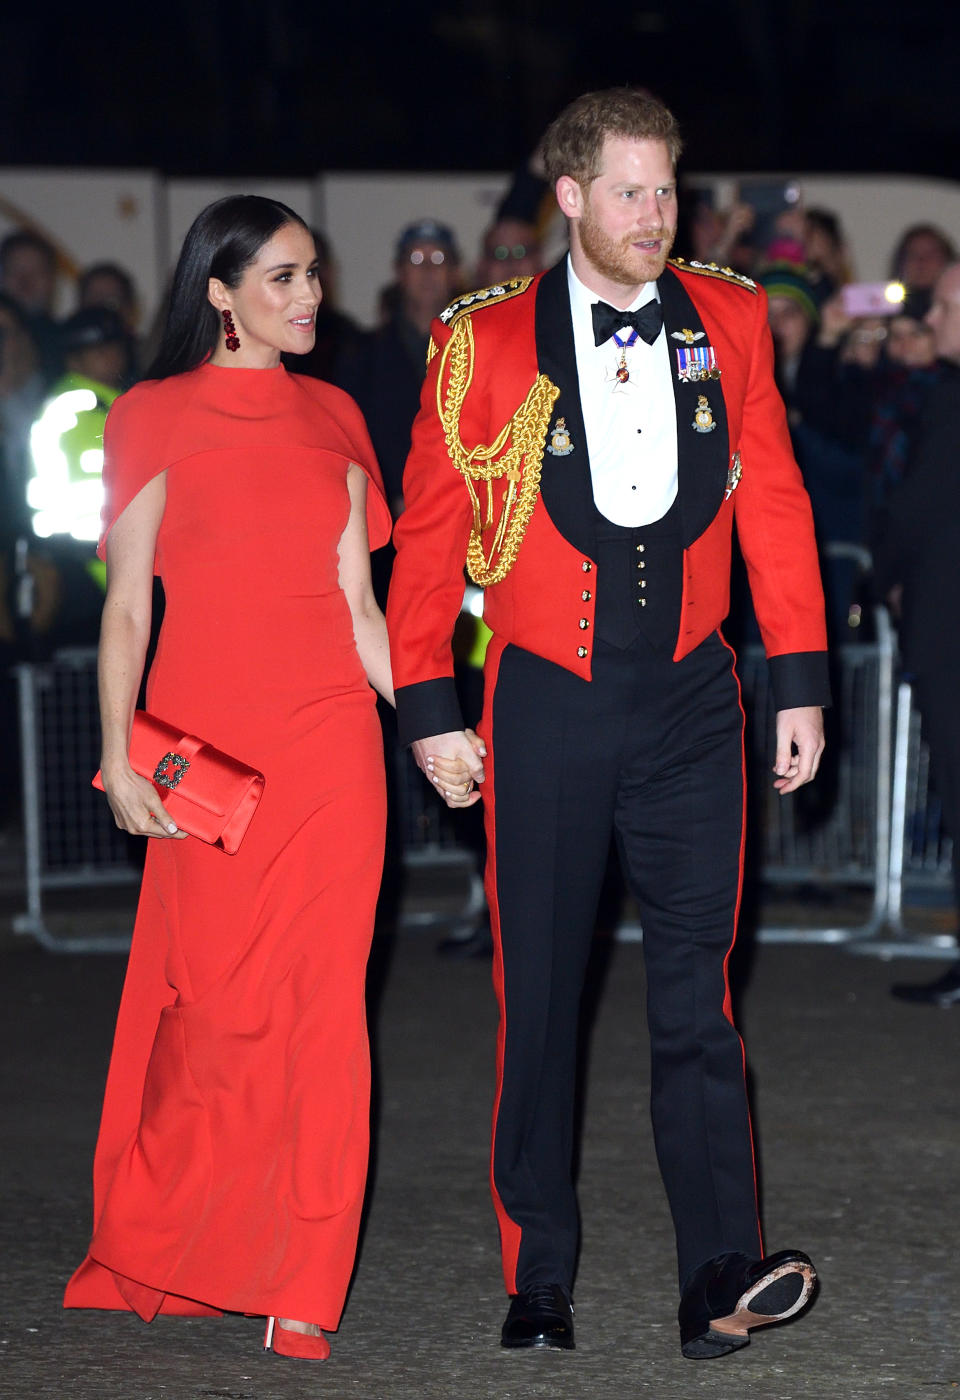 Prince Harry, Duke of Sussex and Meghan, Duchess of Sussex attend the Mountbatten Festival of Music at Royal Albert Hall on March 07, 2020 in London, England. (Photo by Karwai Tang/WireImage)